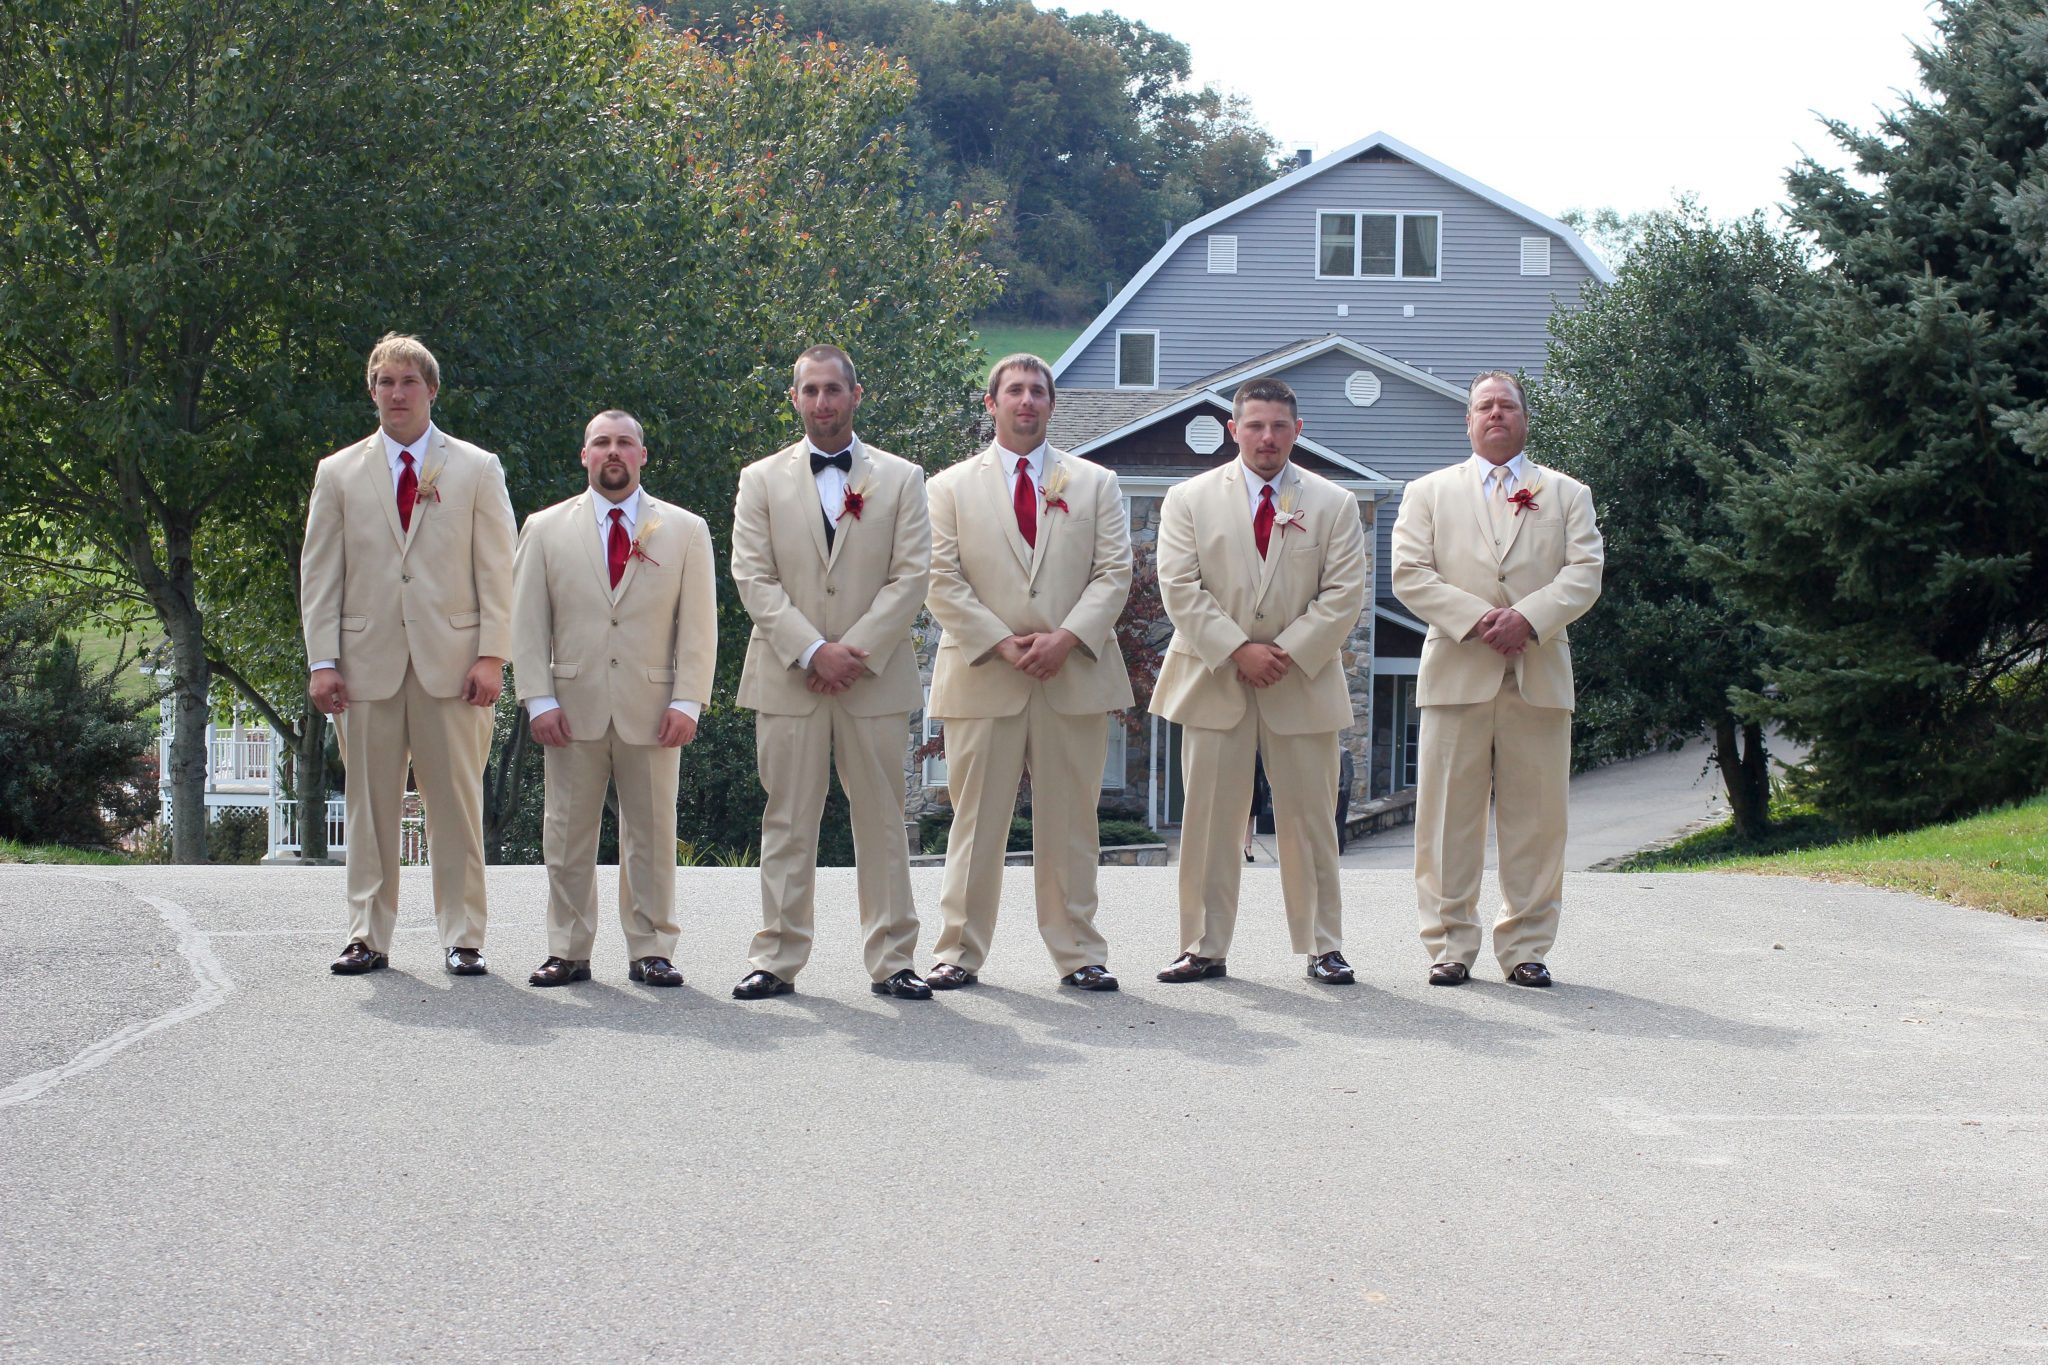 The boys pose on driveway of Morningside Inn and still remain out of site of bride before the fall wedding ceremony and reception